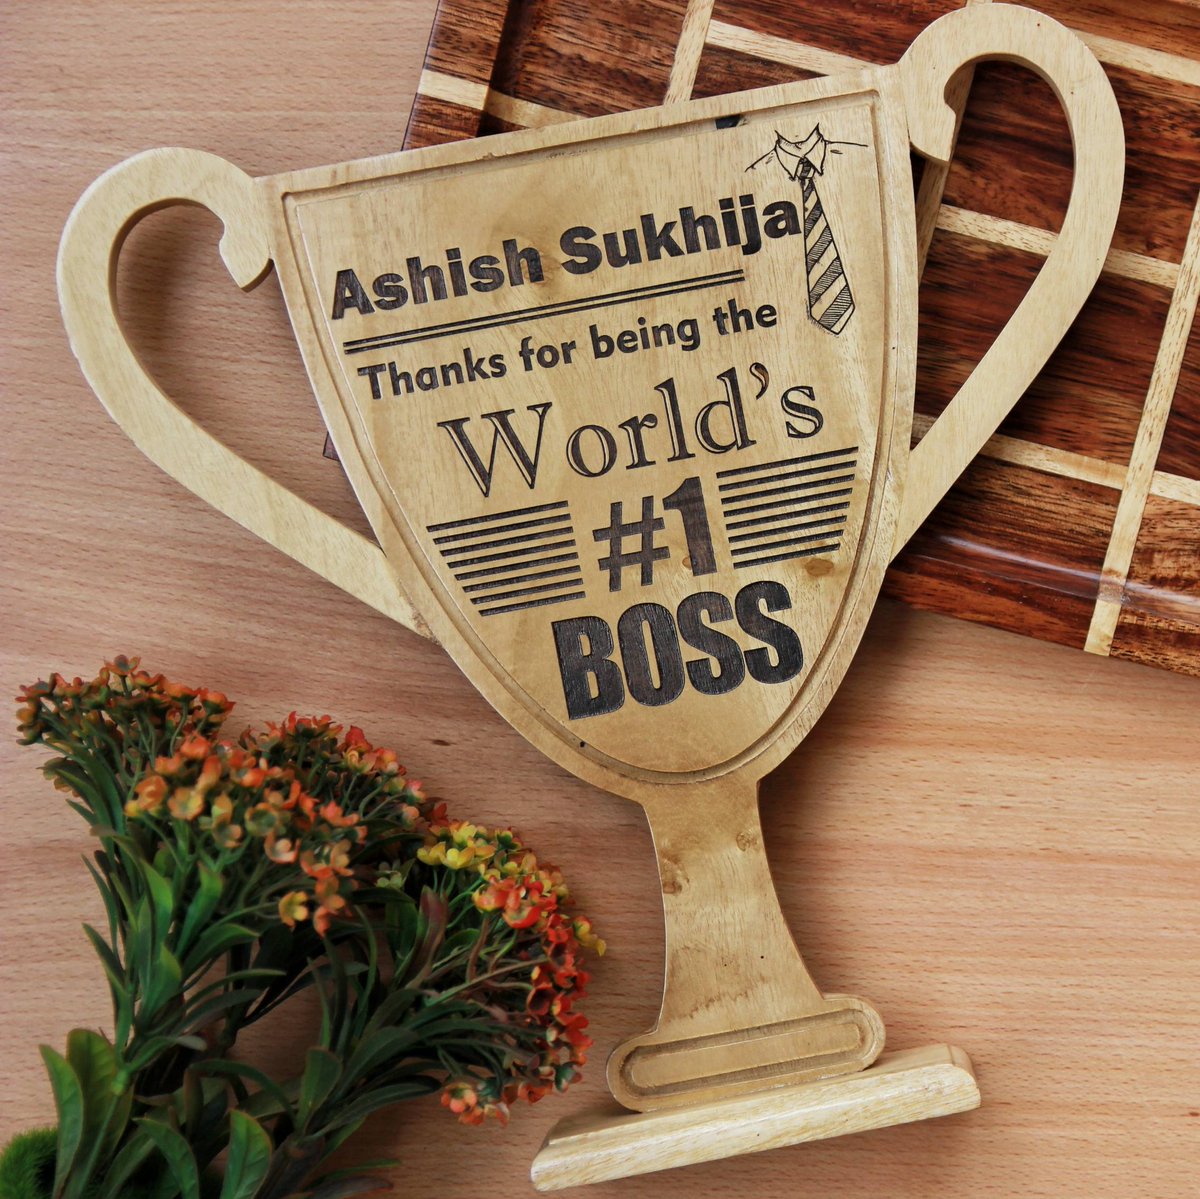 An engraved wooden trophy for the best boss ever!
.
.
.
#woodgeek #woodgeekstore #giftforboss #bestbossever #trophy #trophycup #woodentrophy #officegifts #corporategifts #corporategift #businessgifts #woodengifts #personalised #engraved